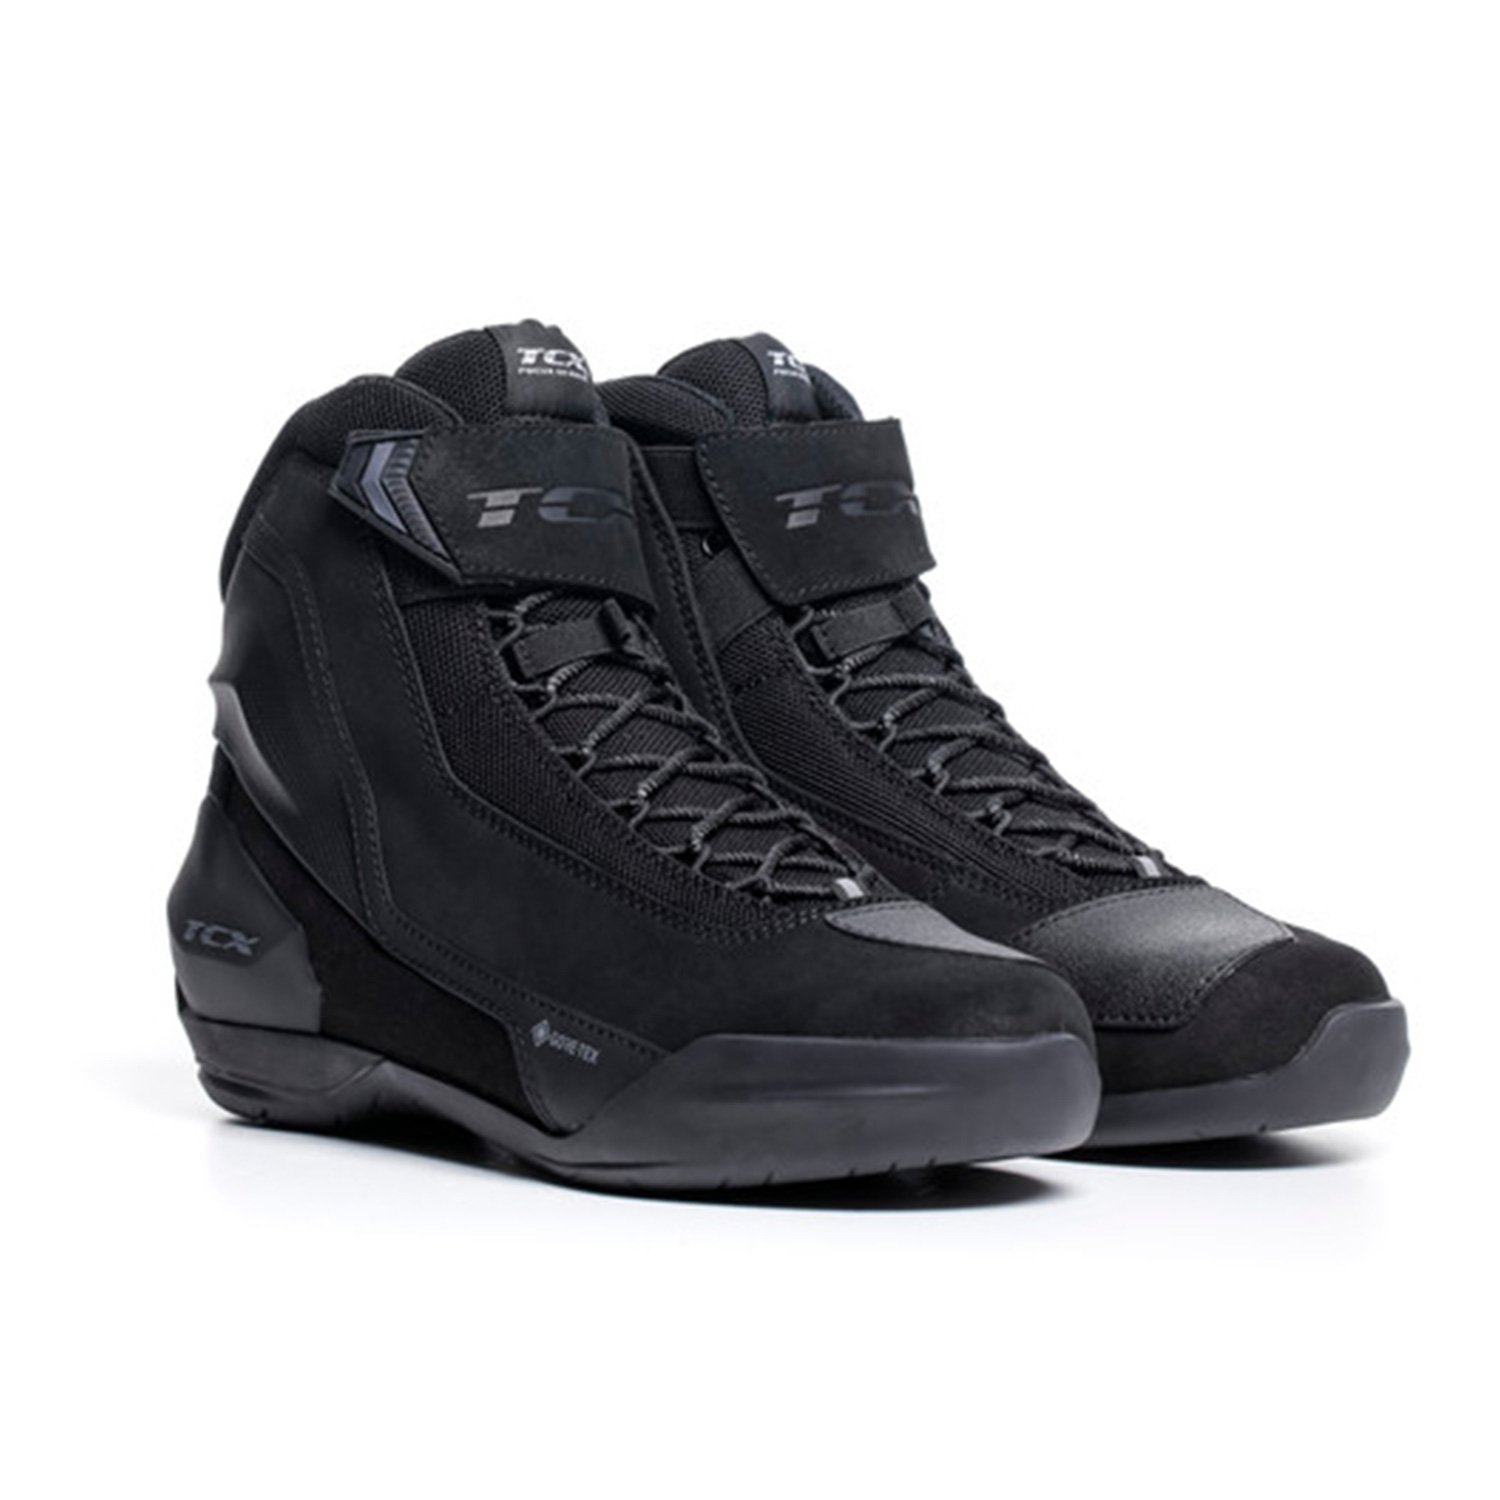 Image of TCX Jupiter 5 Gore-Tex Noir Chaussures Taille 47